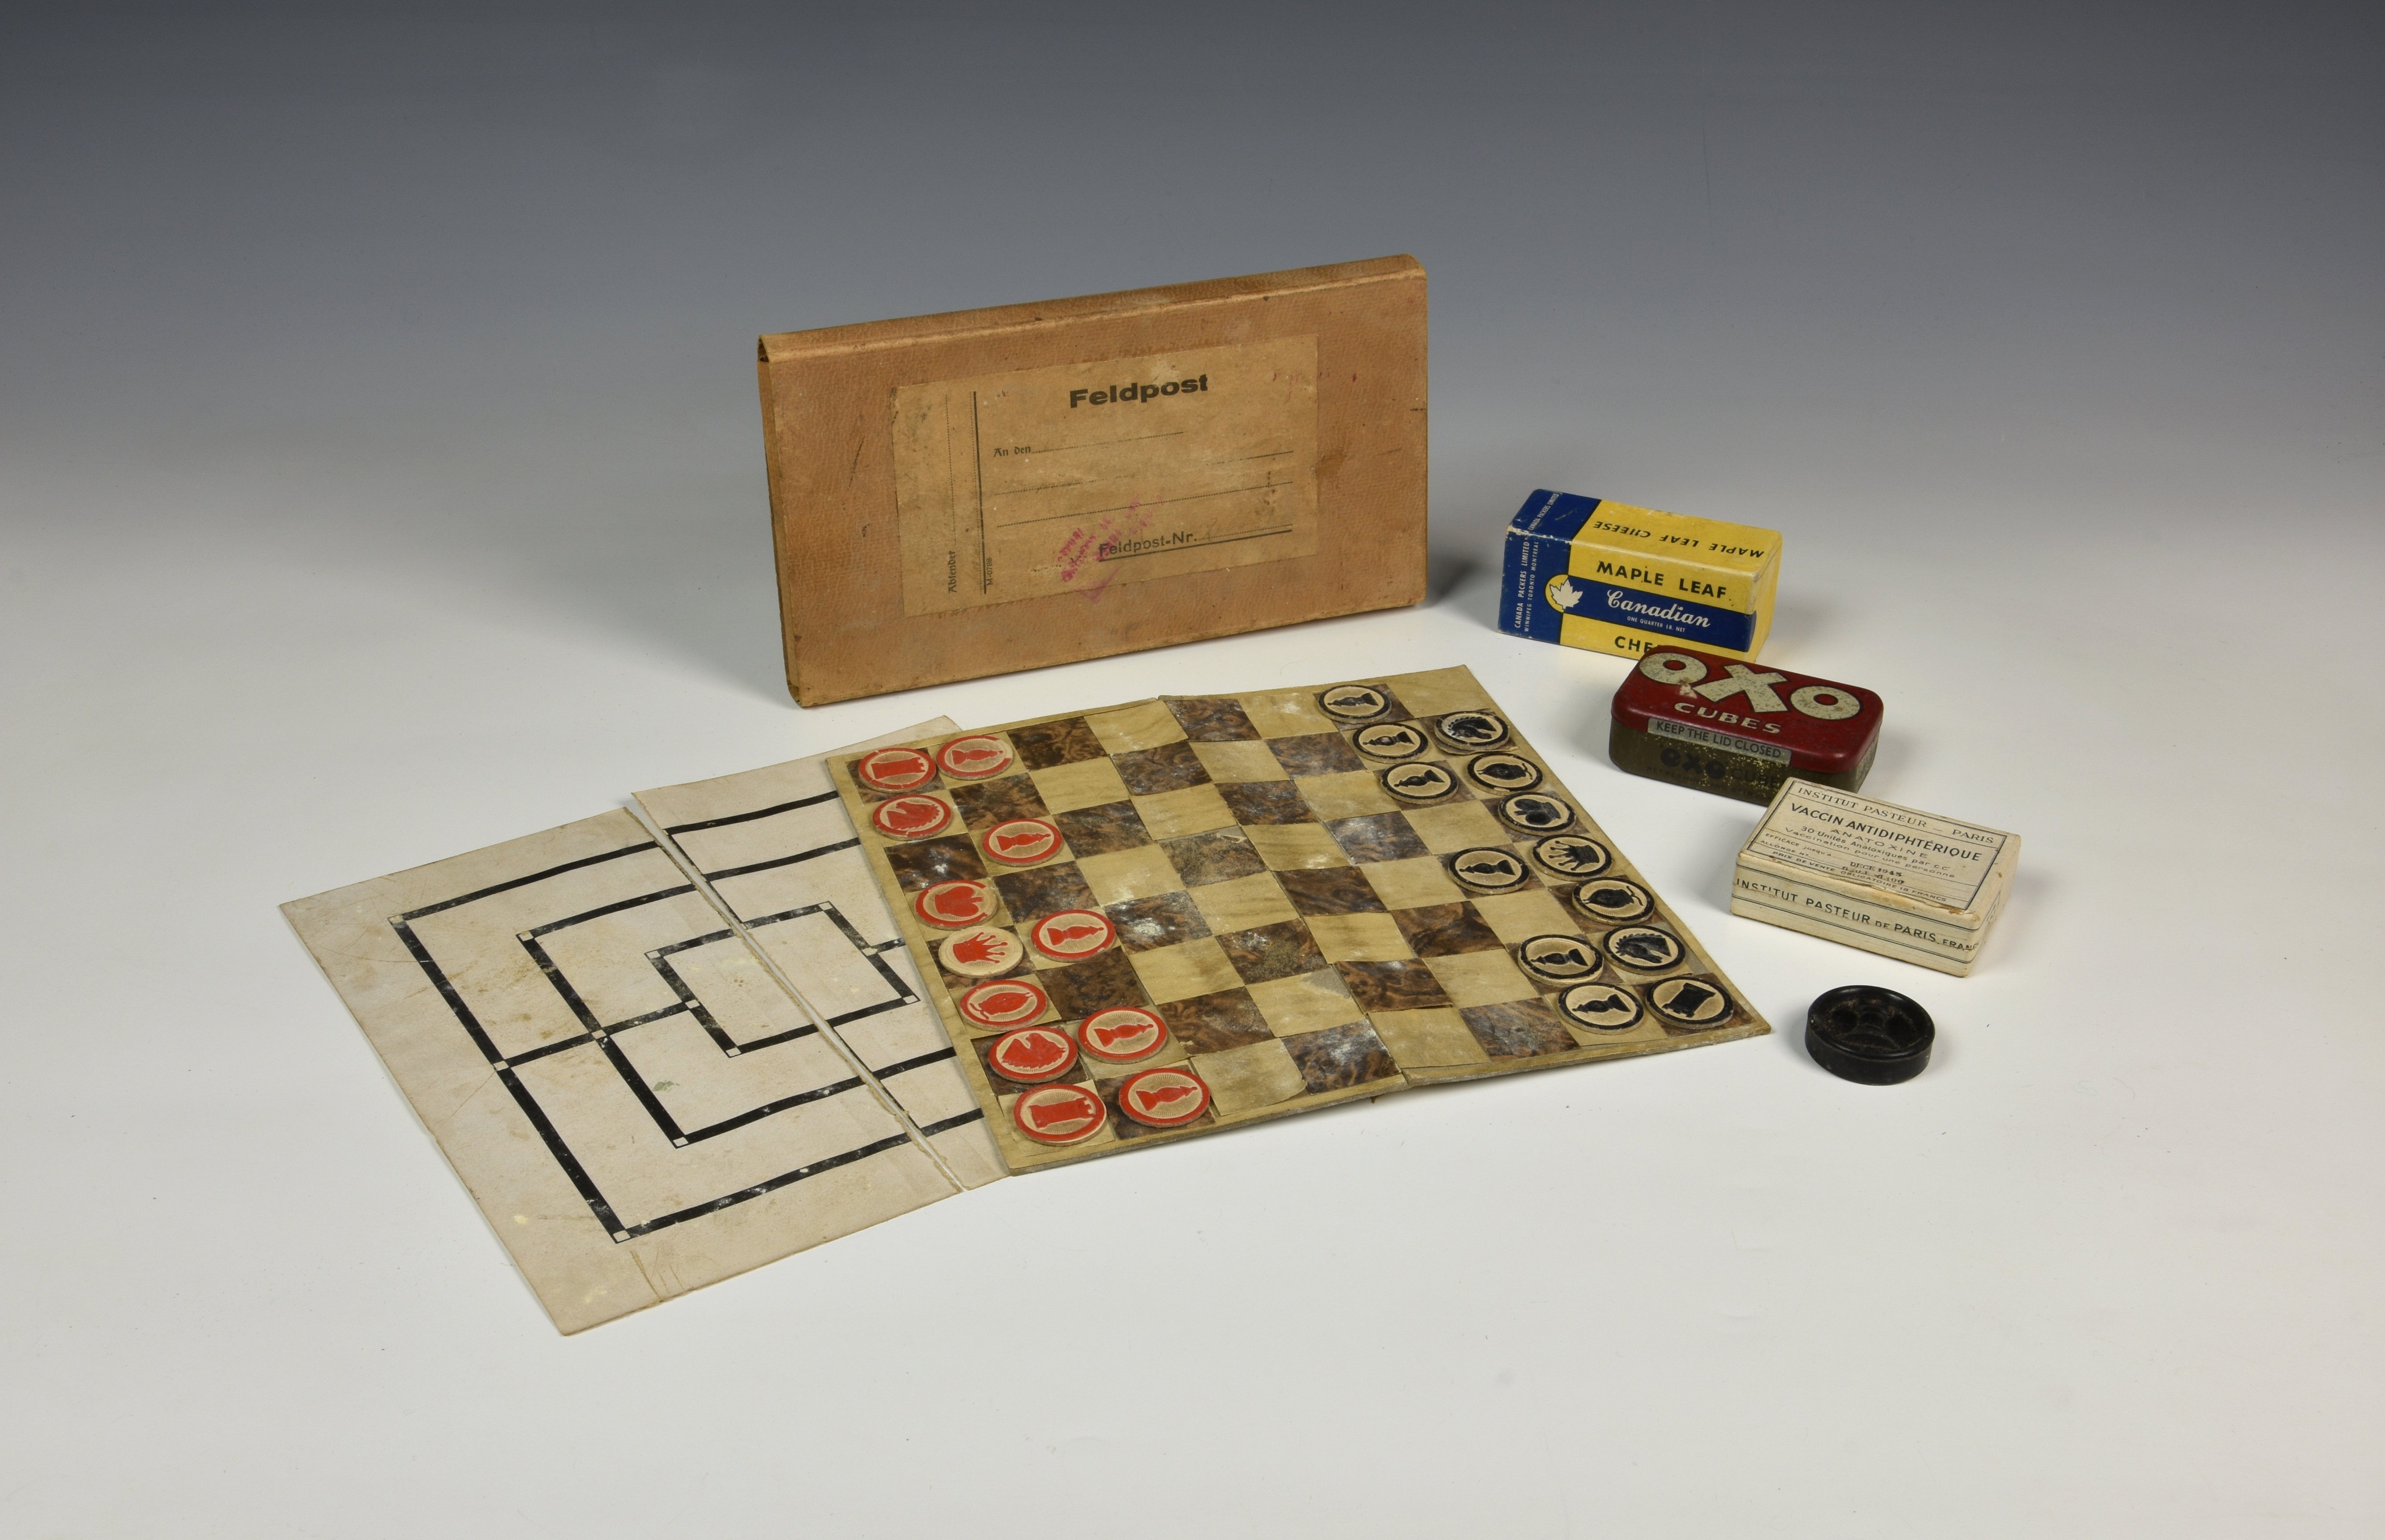 German Occupation of Jersey interest - "Feldpost" labelled chess & draughts game, of card and